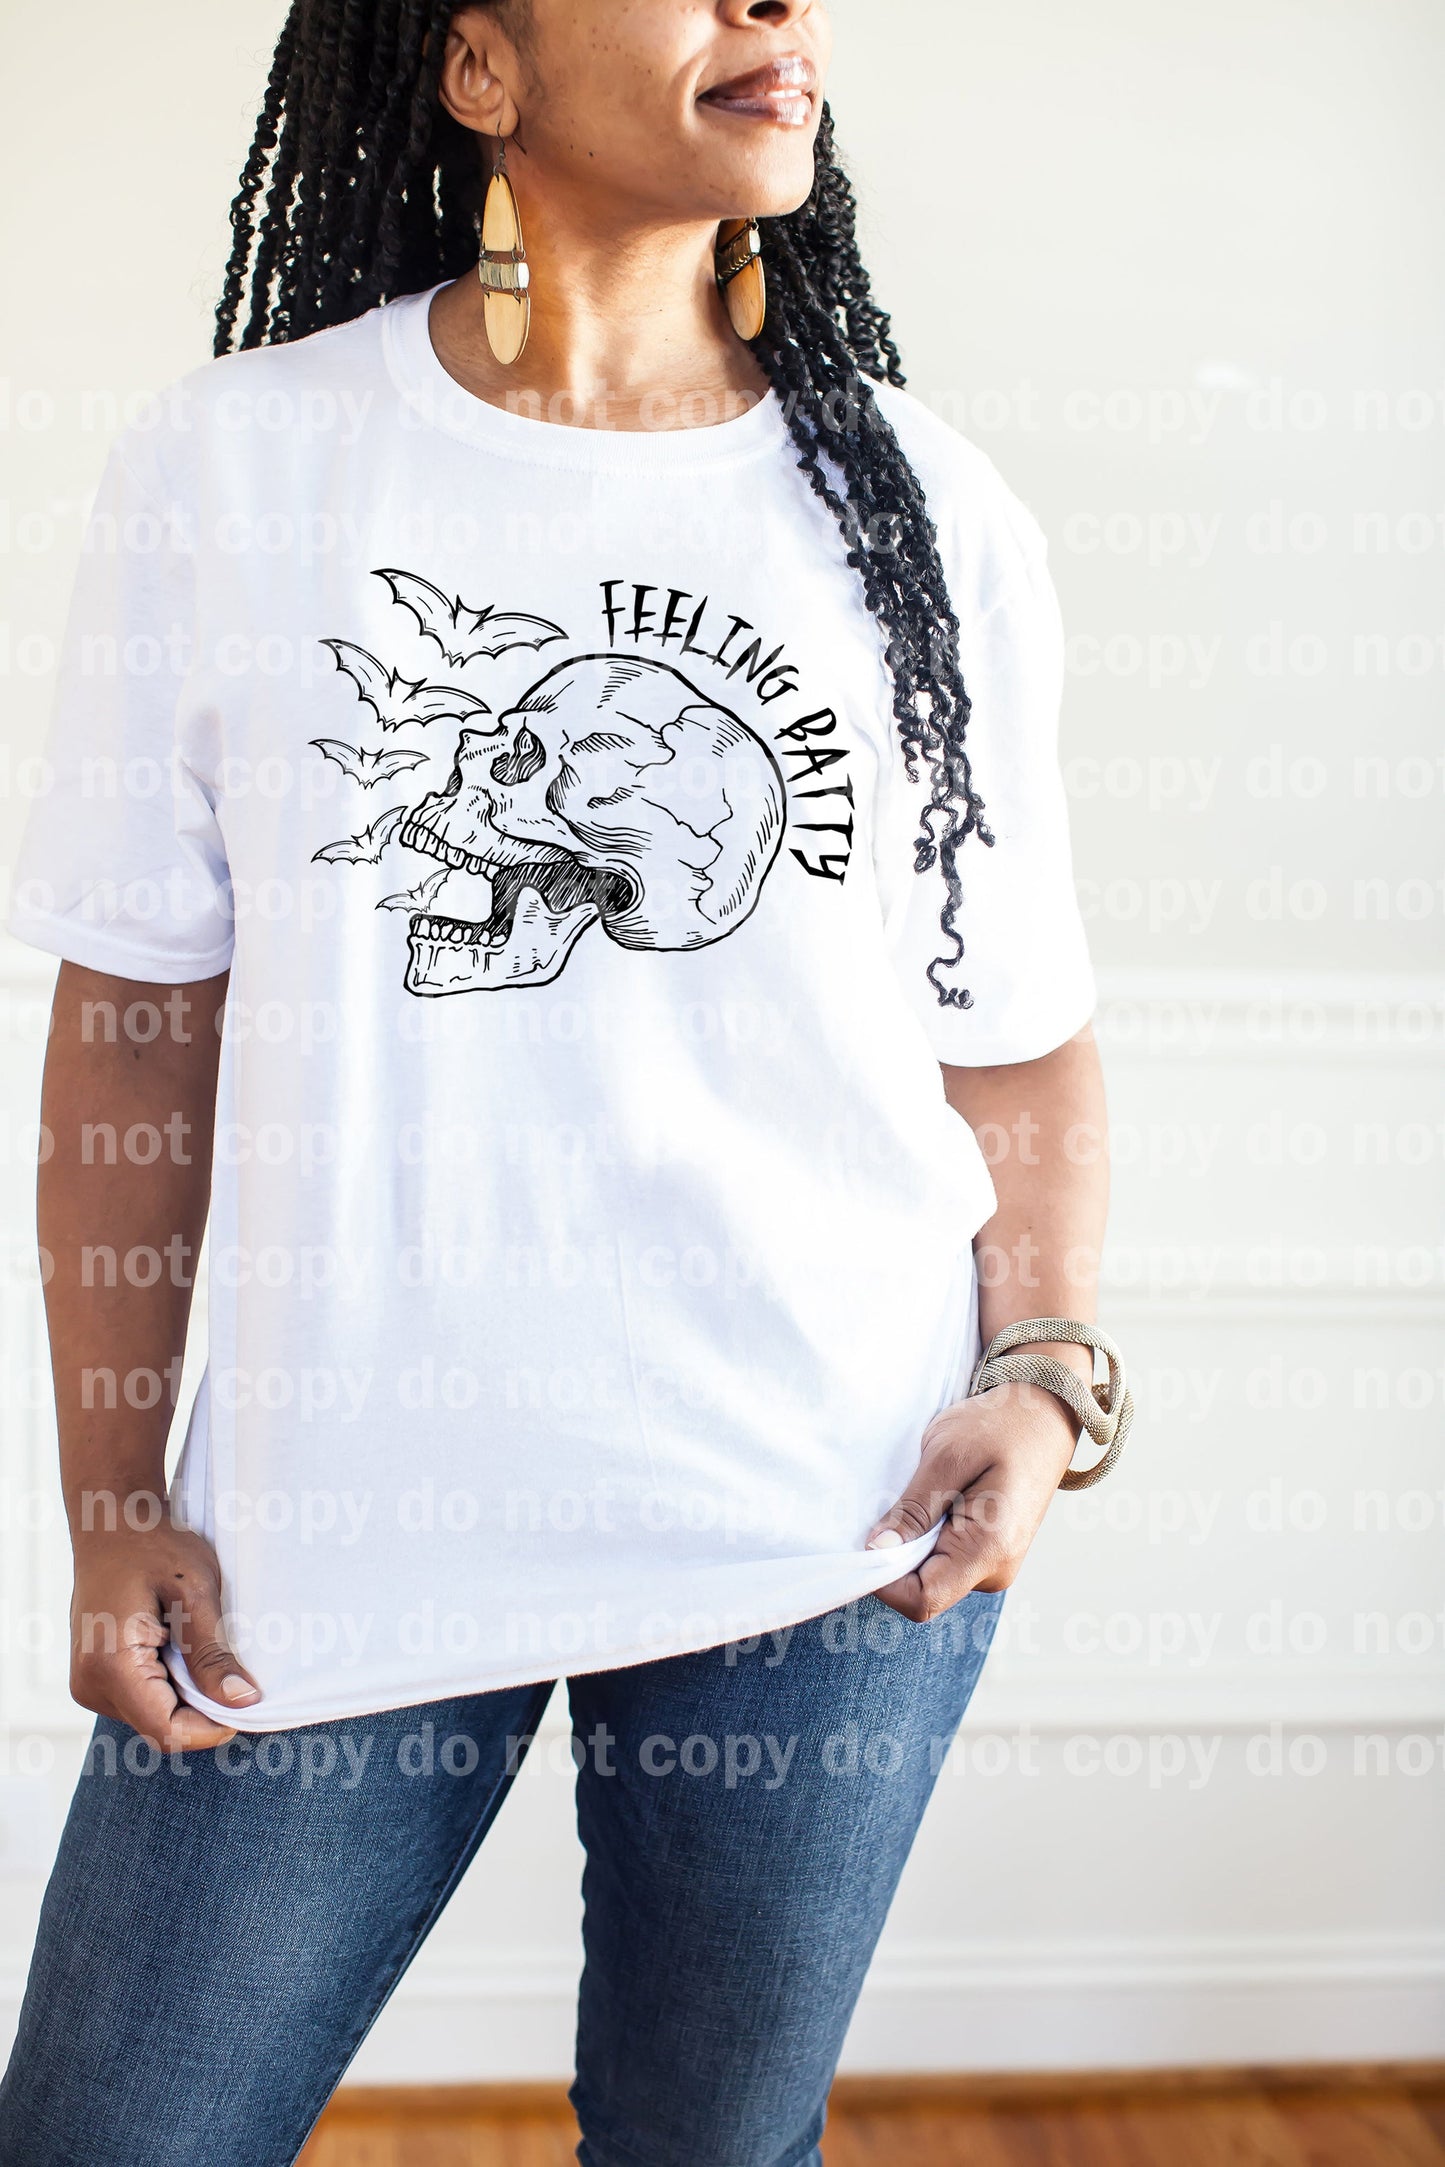 Feeling Batty Skellie Full Color/One Color with Pocket Option Dream Print or Sublimation Print